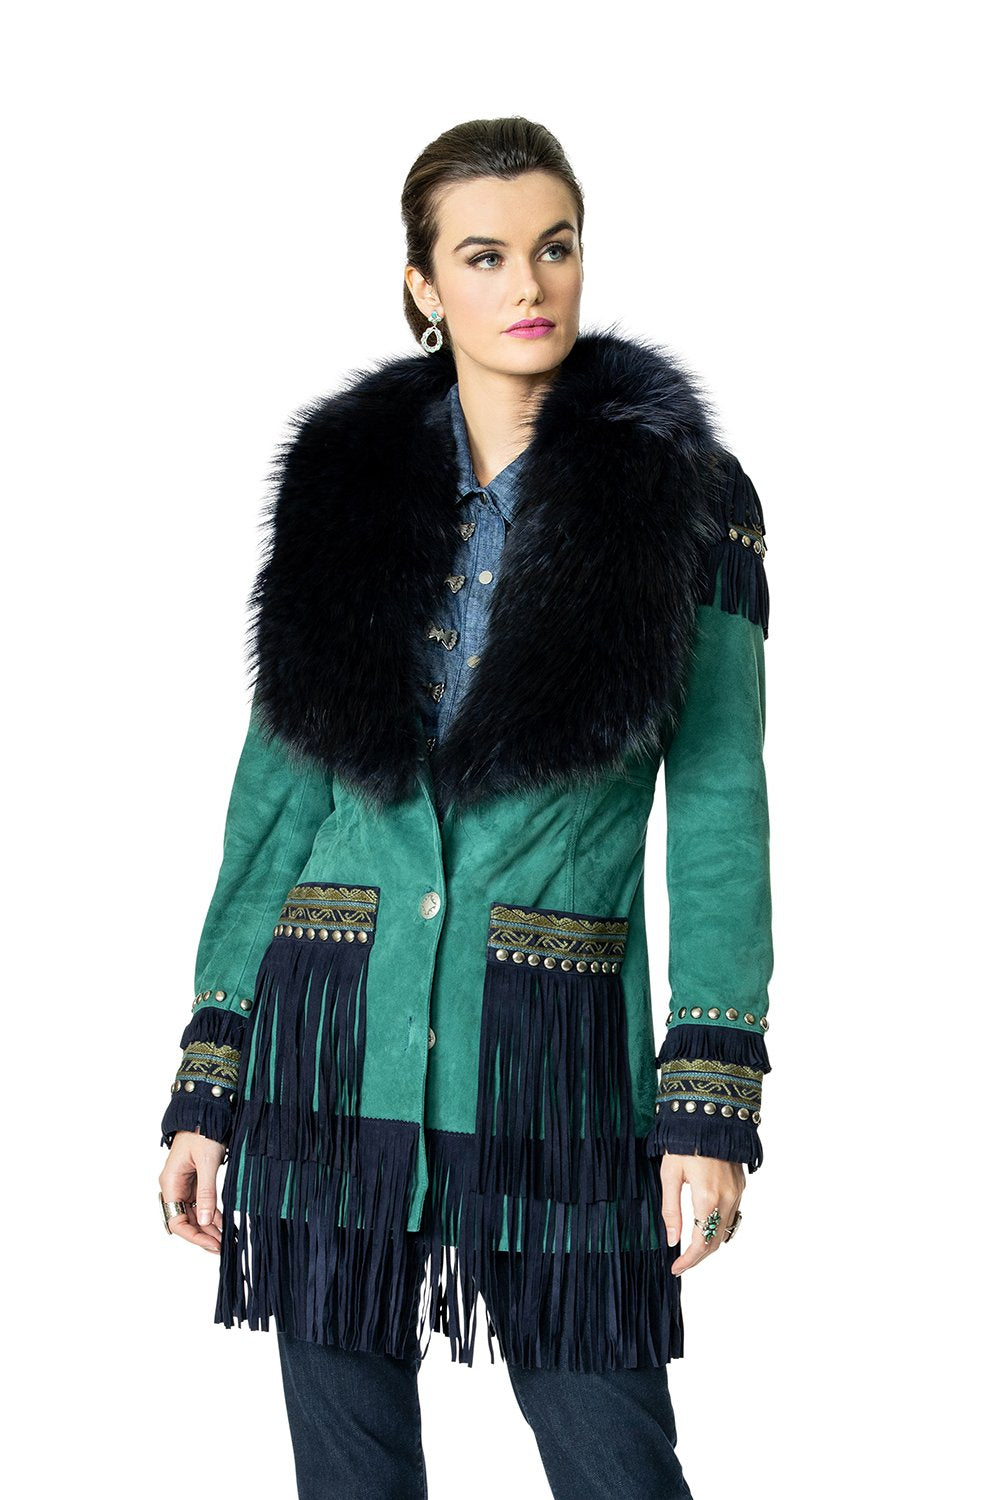 Load image into Gallery viewer, DDR Sandia Pass Teal Jacket 6Whiskey six whisky knee-length leather fringe coat Taos Holiday collection C2756
